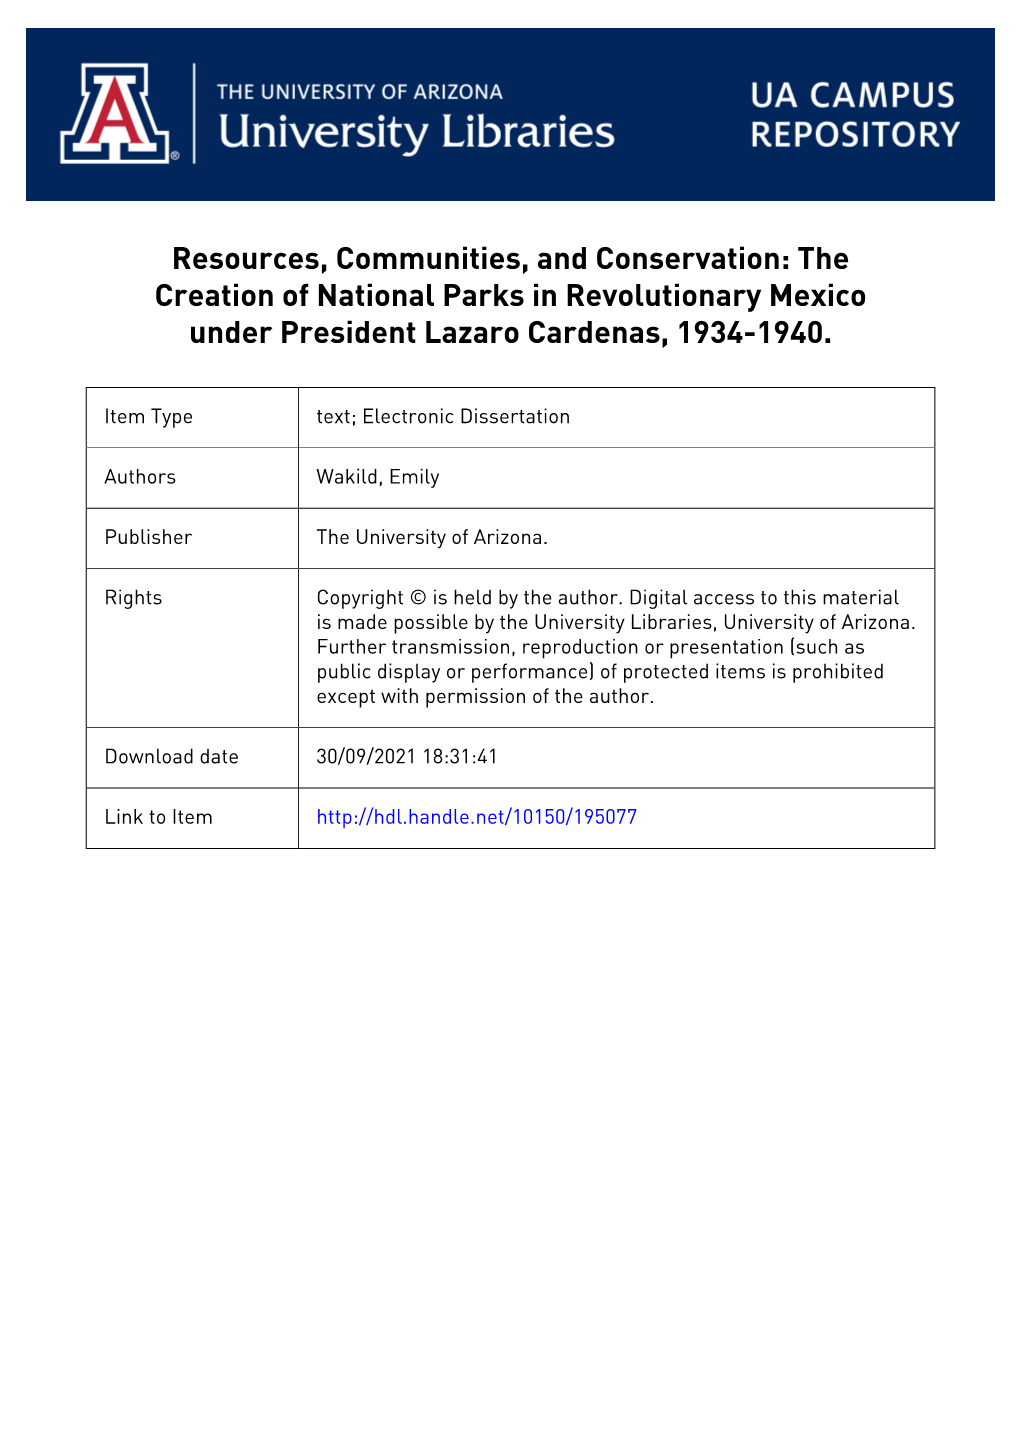 Resources, Communities, and Conservation: the Creation of National Parks in Revolutionary Mexico Under President Lazaro Cardenas, 1934-1940